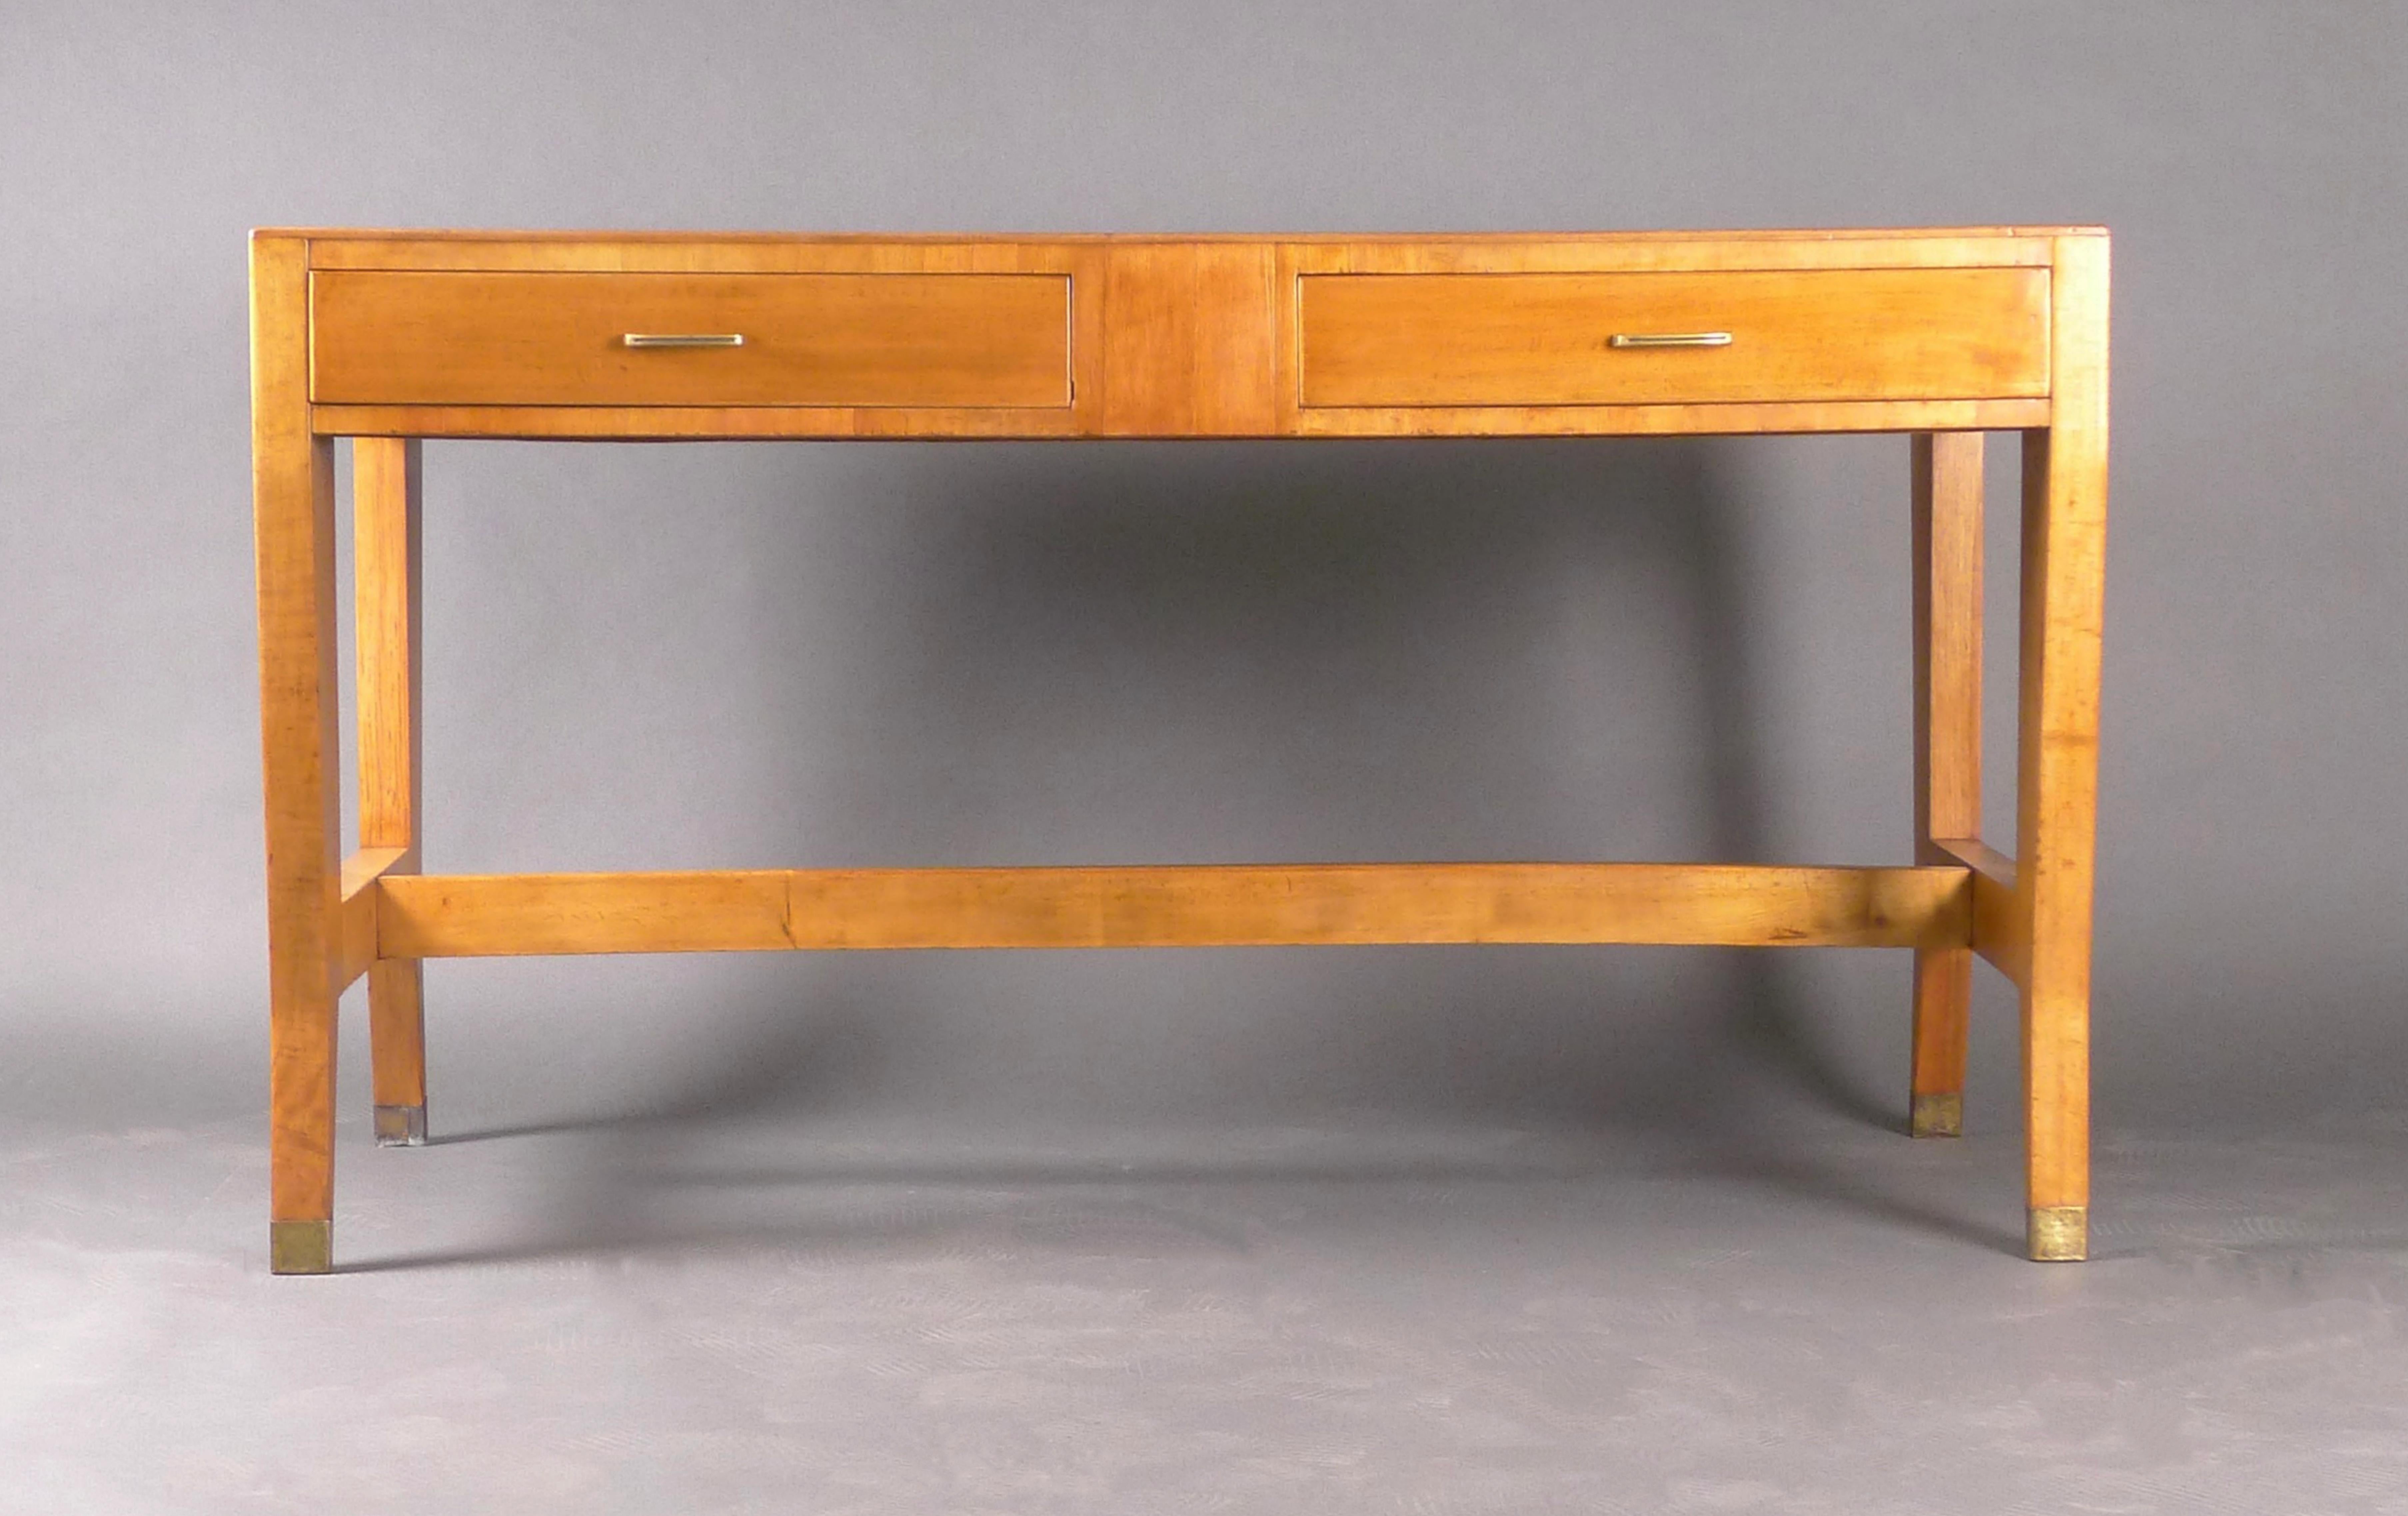 Gio Ponti desk in light walnut on shaped tapering legs united by stretchers.  The wood is in excellent condition with beautiful graining to the planked top, and the two drawers to the front slide smoothly, pulled with brass loop handles.

140cm